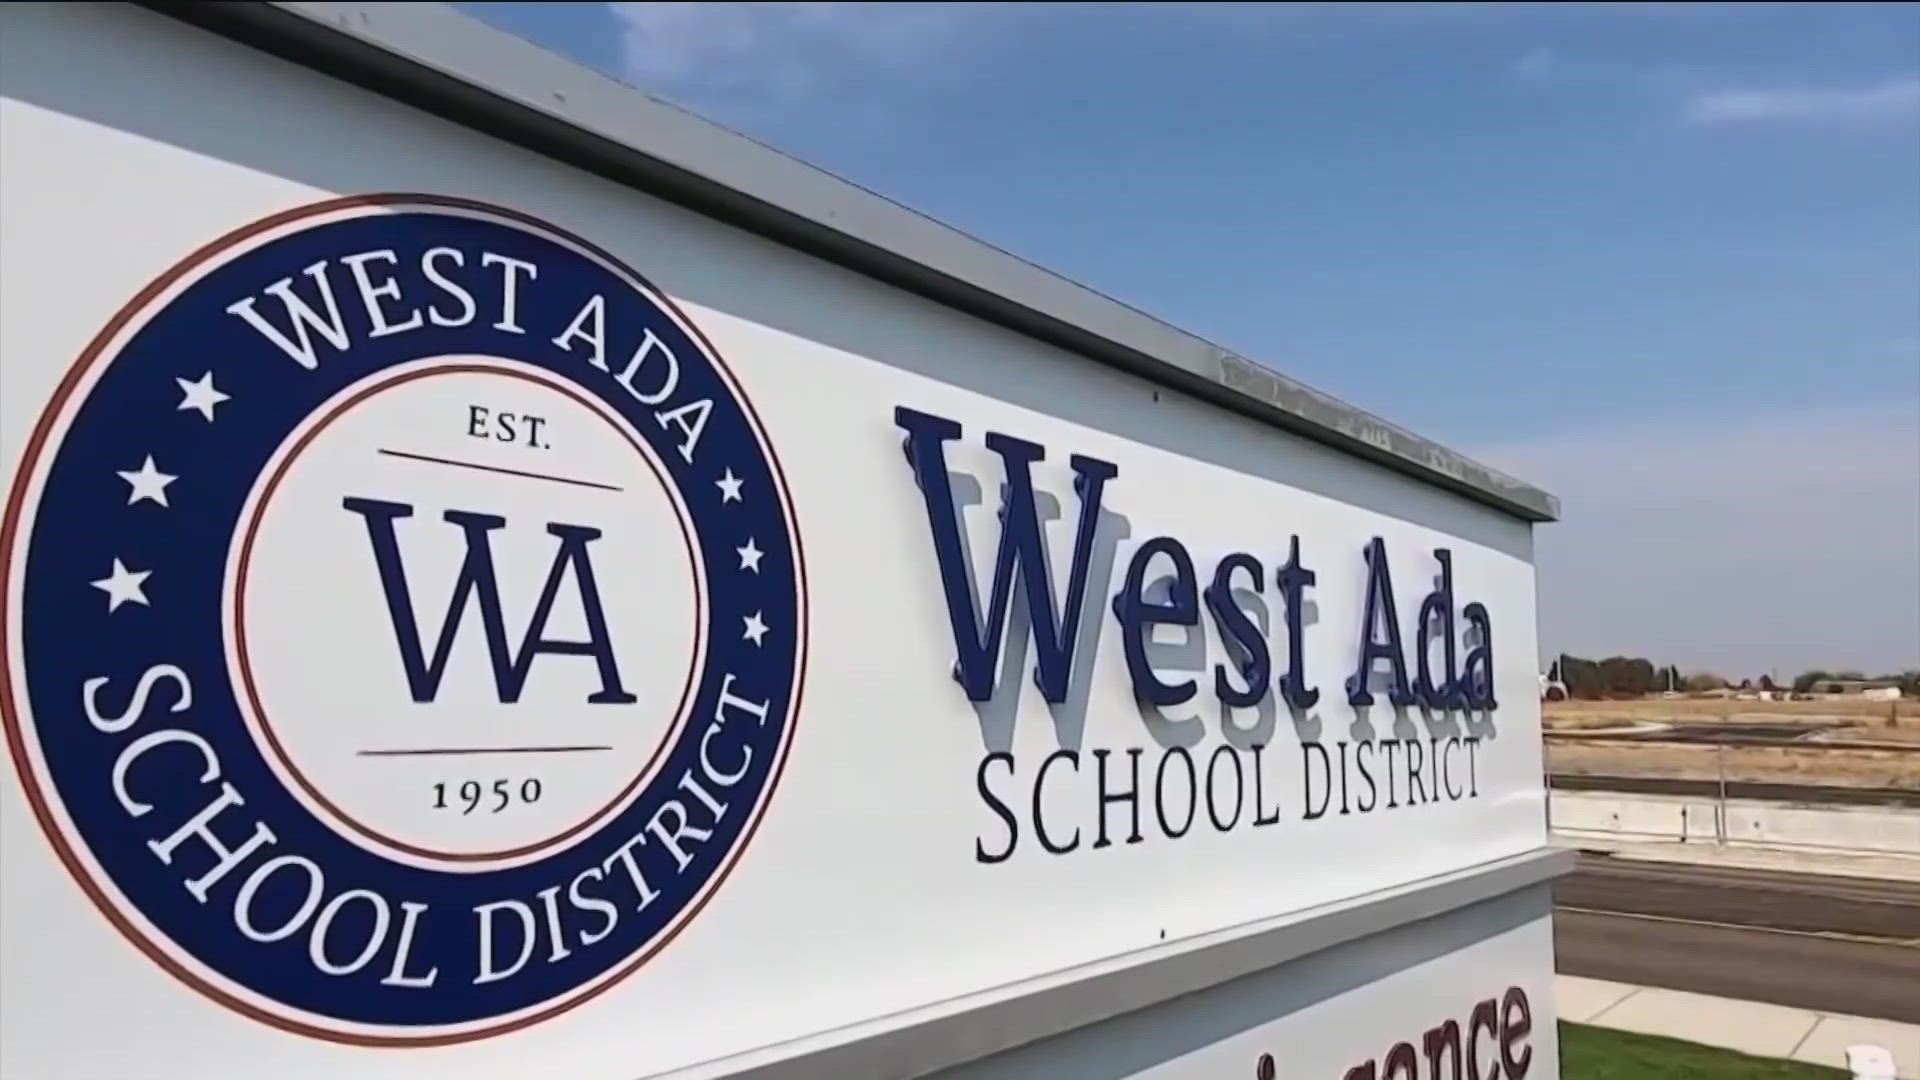 West Ada School District (WASD) is asking people to make donations towards student lunch balances since COVID-19 waivers have been removed.